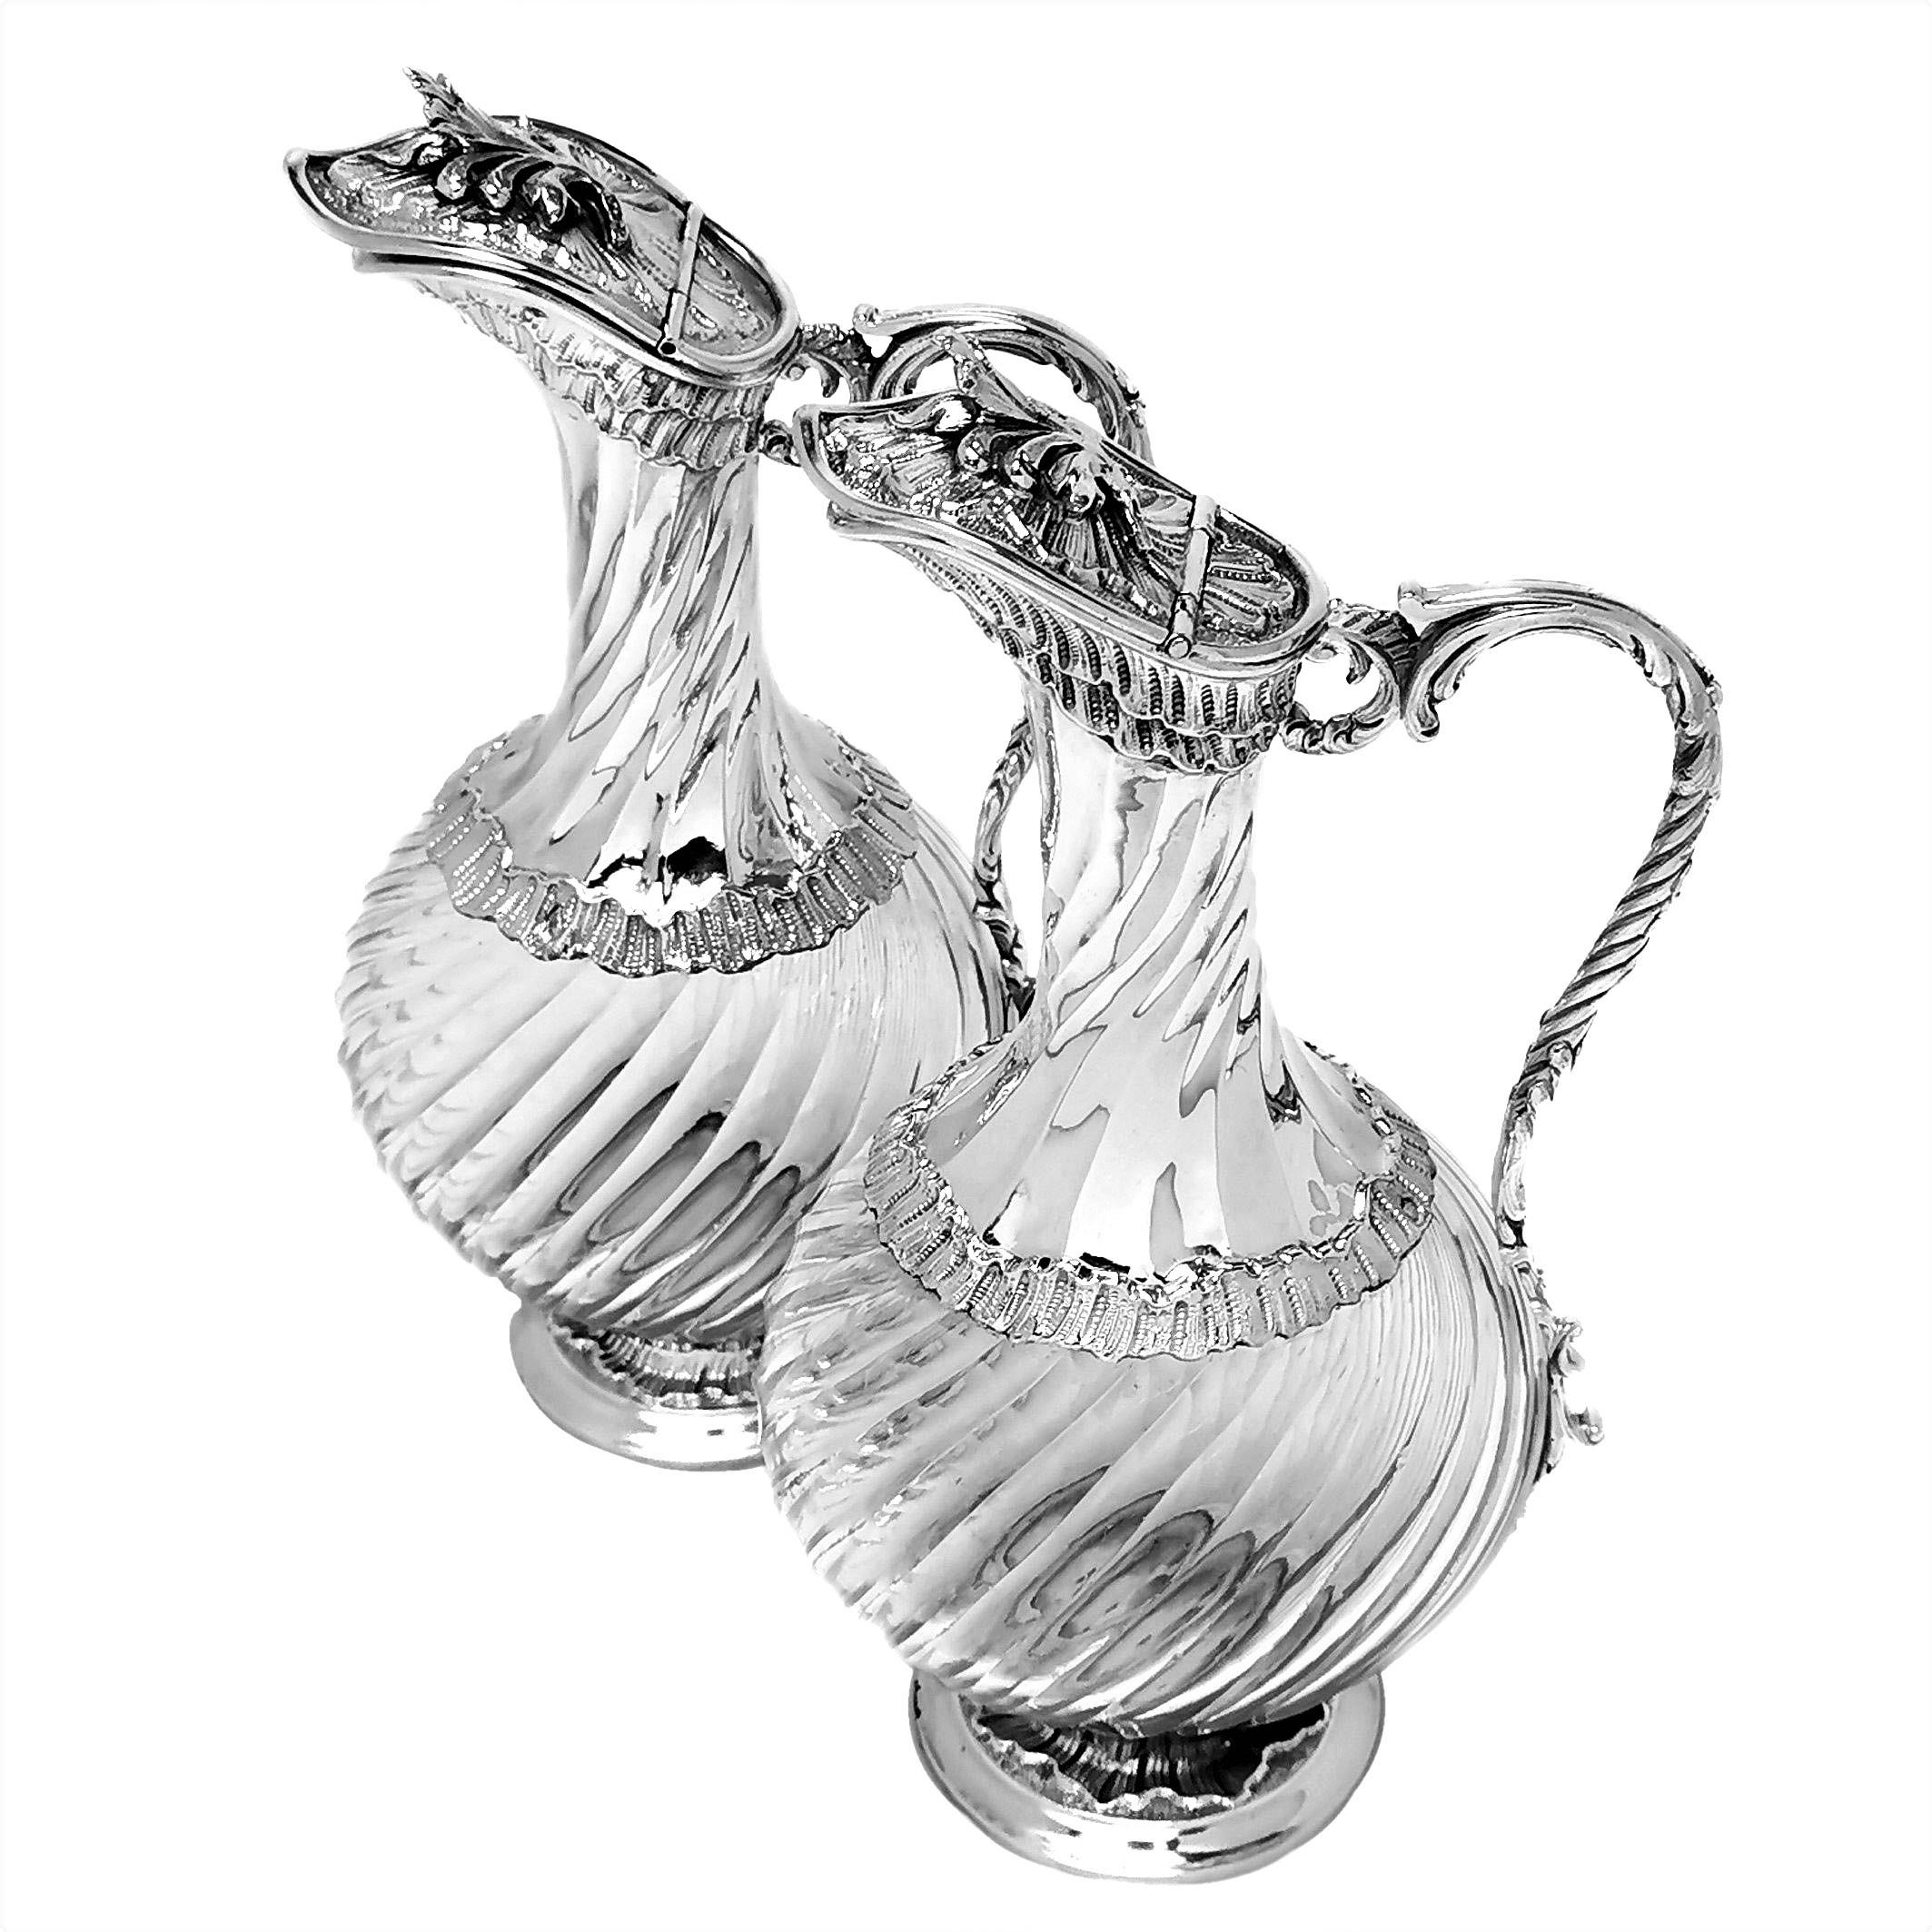 A pair of elegant antique silver mounted French liquor jugs with an subtle writhen fluted design on the clear glass body that is mirrored on the silver neck of the jug. The jug has chased patterned bands on the foot, body and neck. Similar to